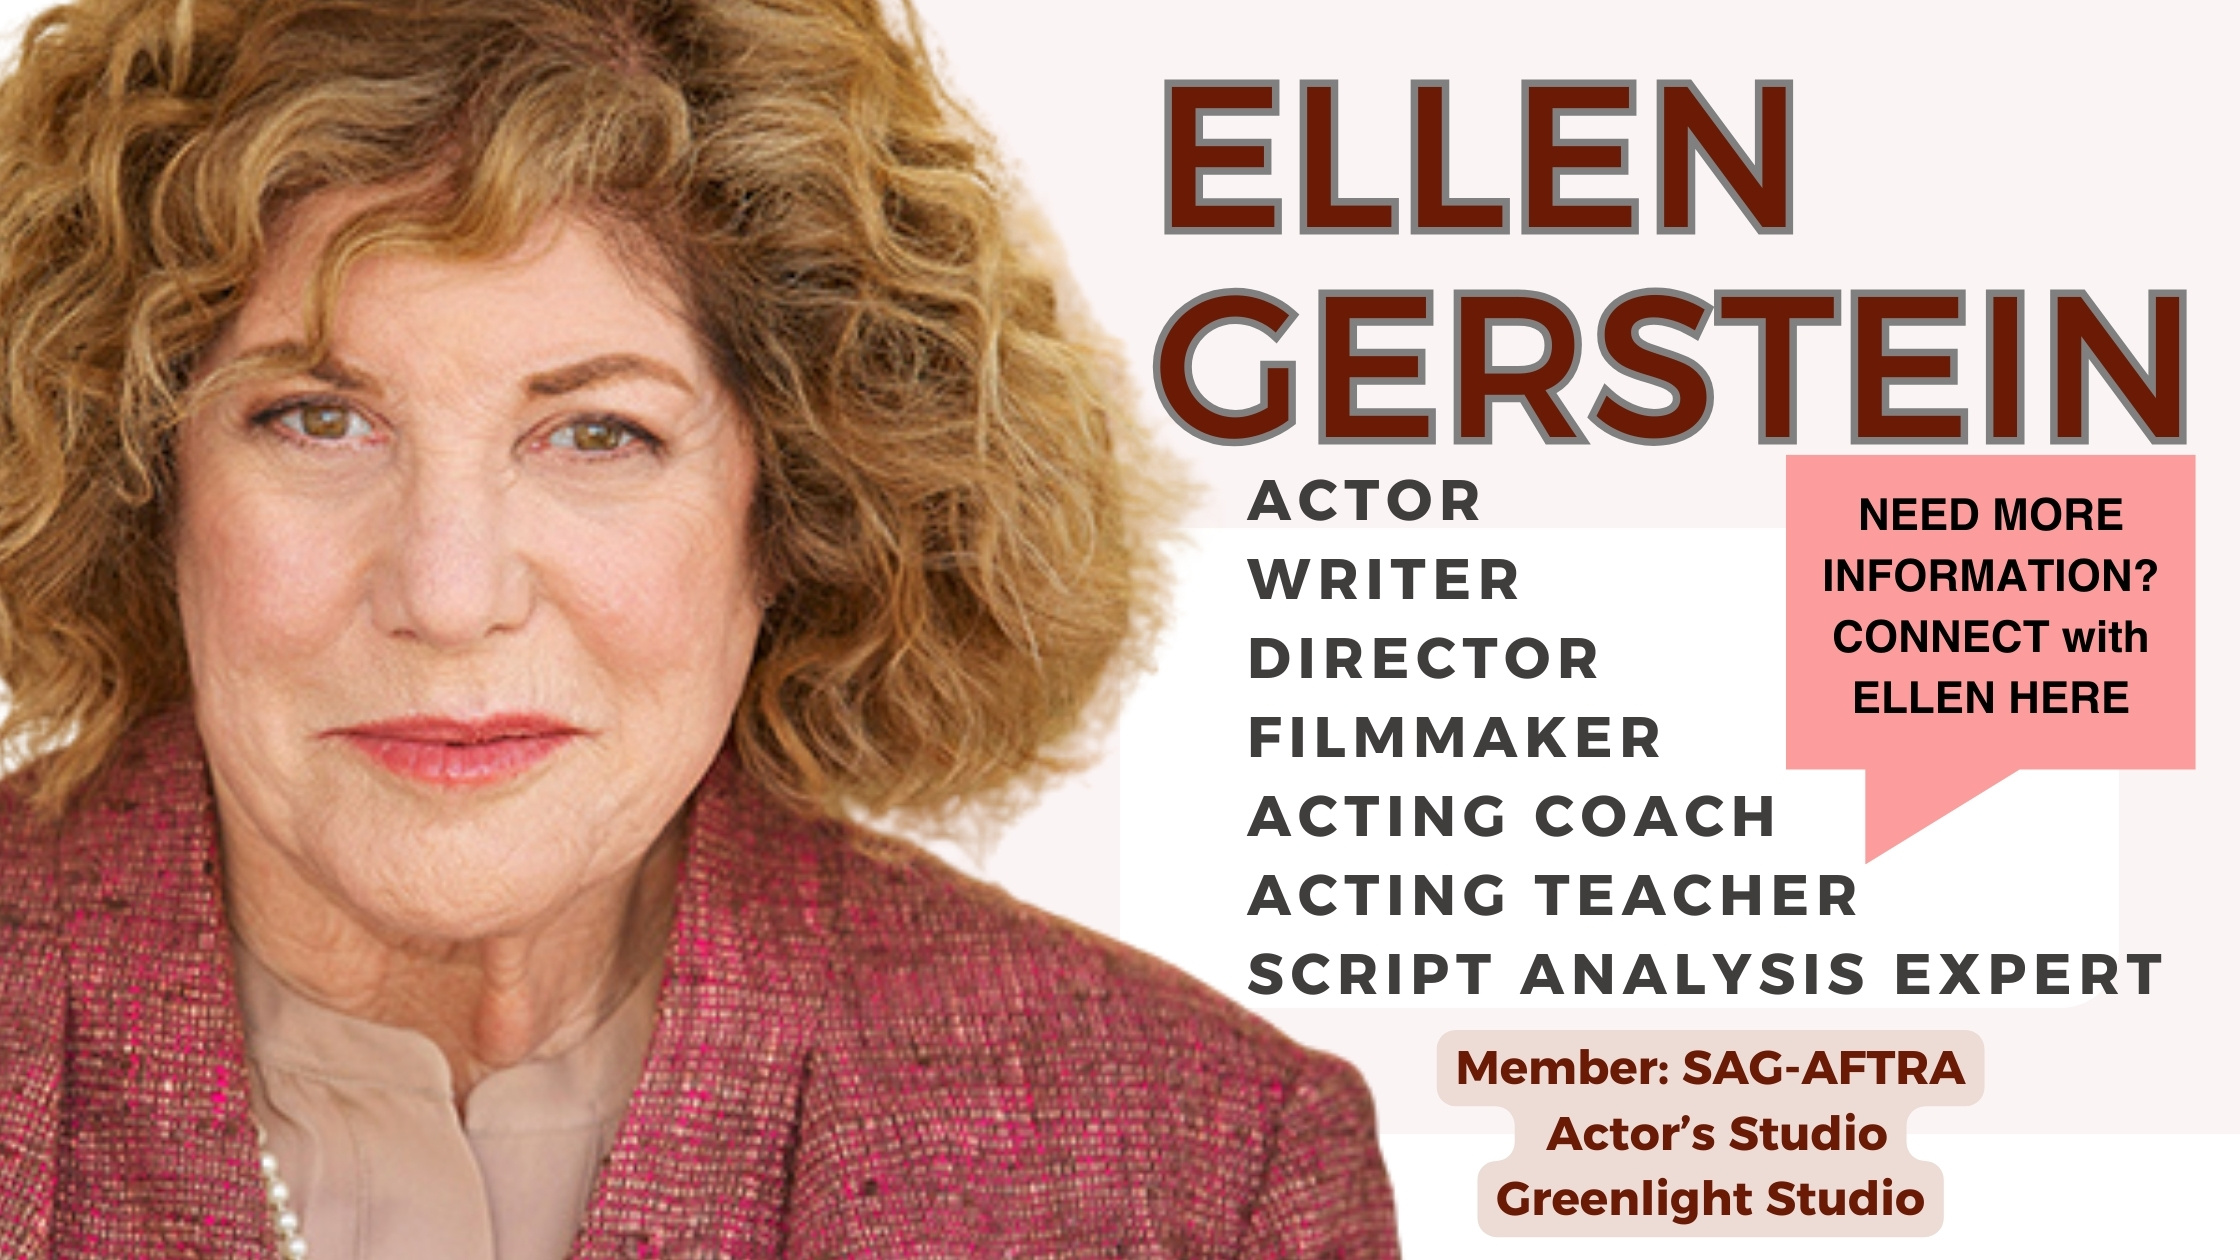 List of services offered for Actors by Ellen Gerstein including audition preparation, actor's workshop, and script analysis